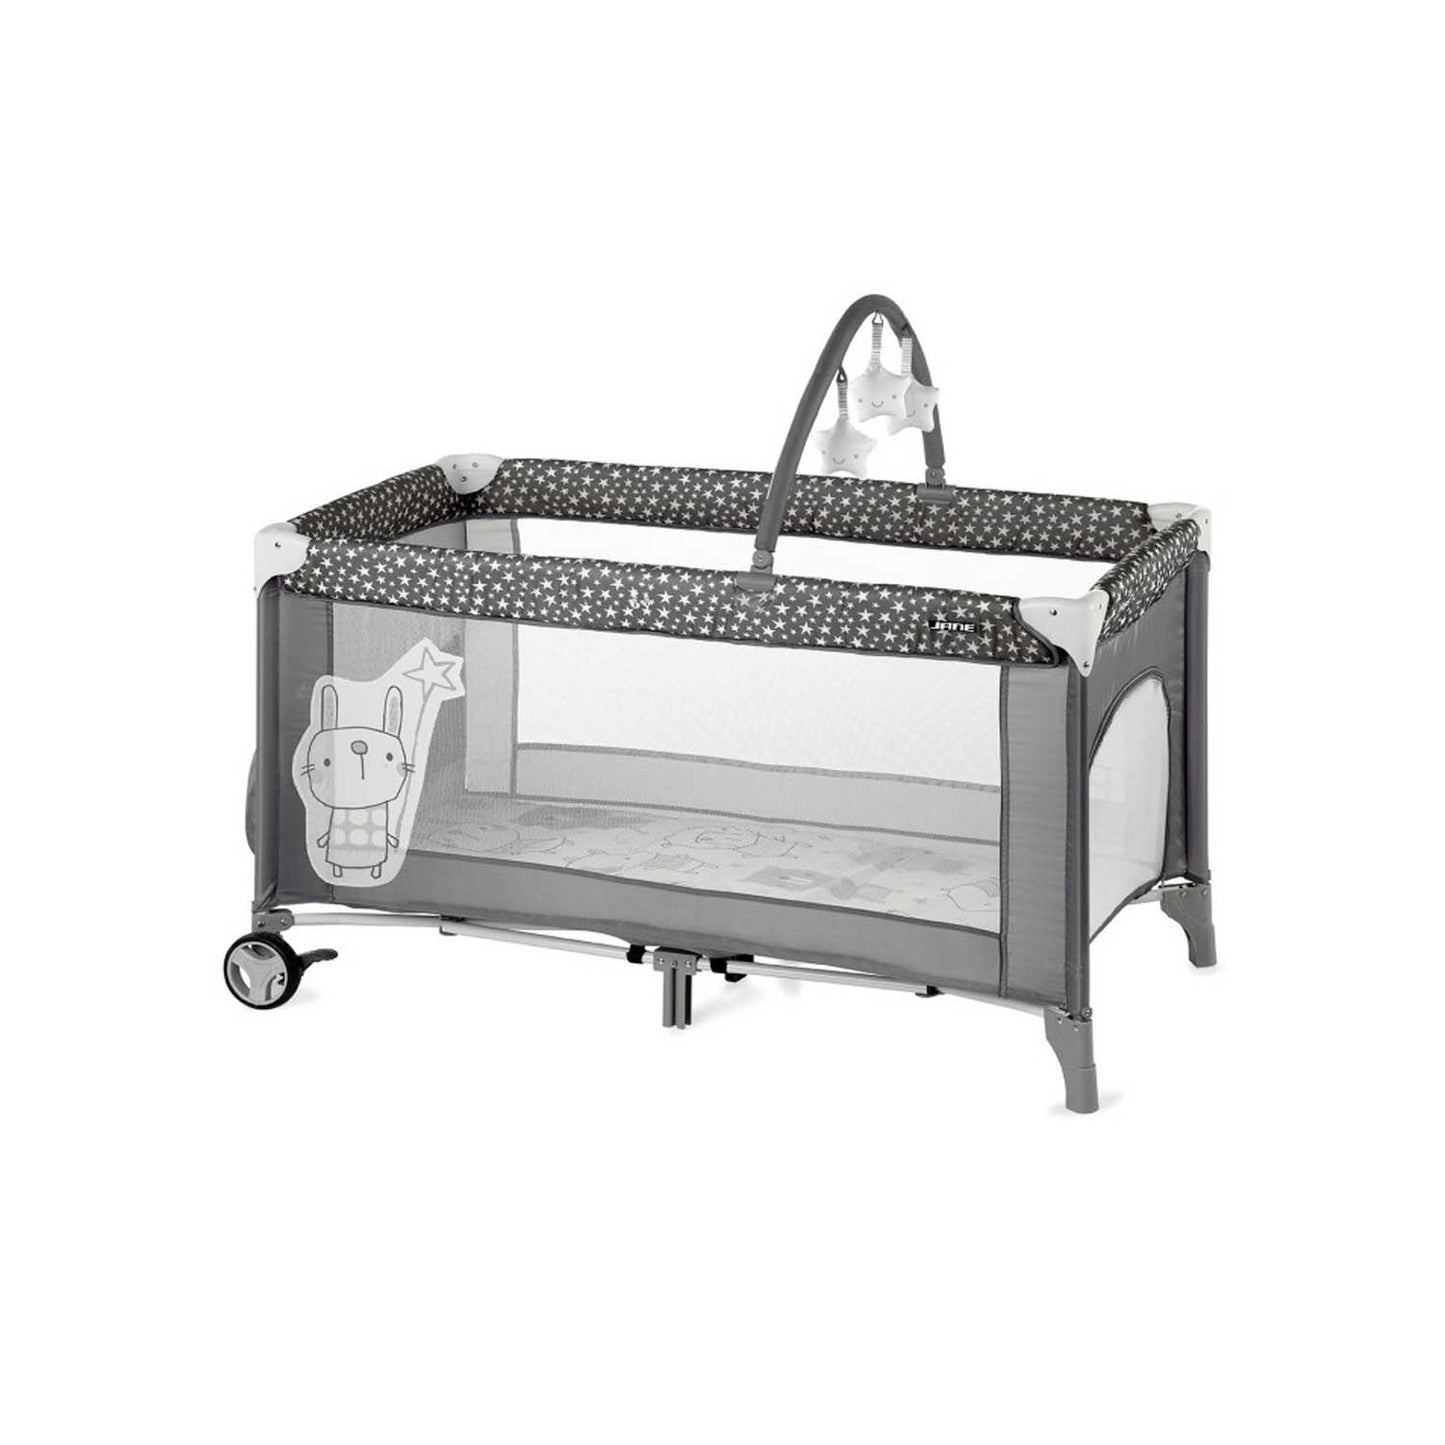 Janè - Travel Cot With One Level Games